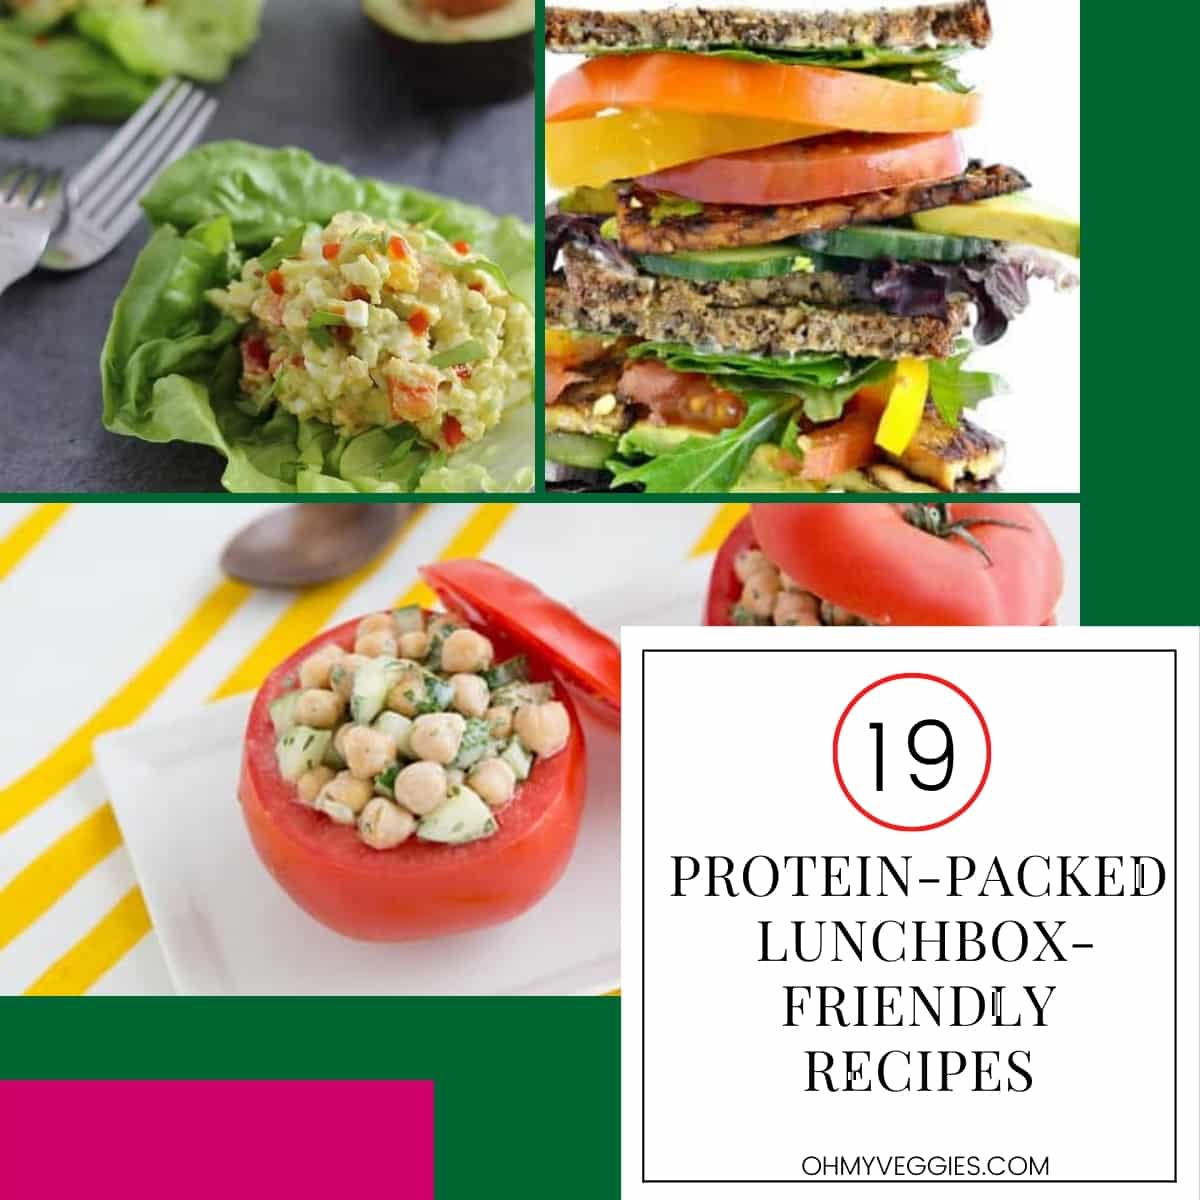 lunchbox-friendly recipes that are vegetarian and high in protein 